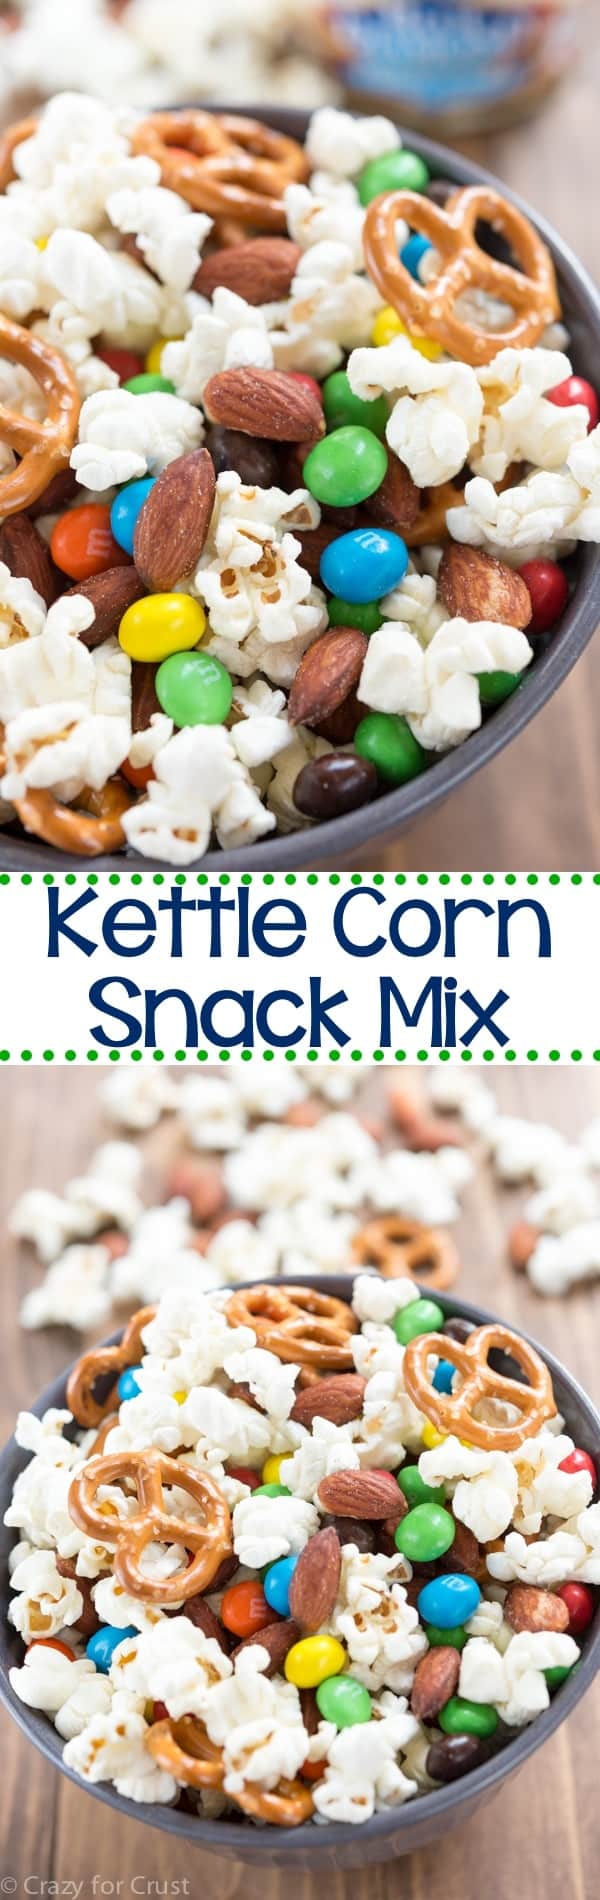 Kettle Corn Snack Mix with almonds! EASY homemade kettle corn is mixed with candy, almonds, and pretzels to make the perfect snack!